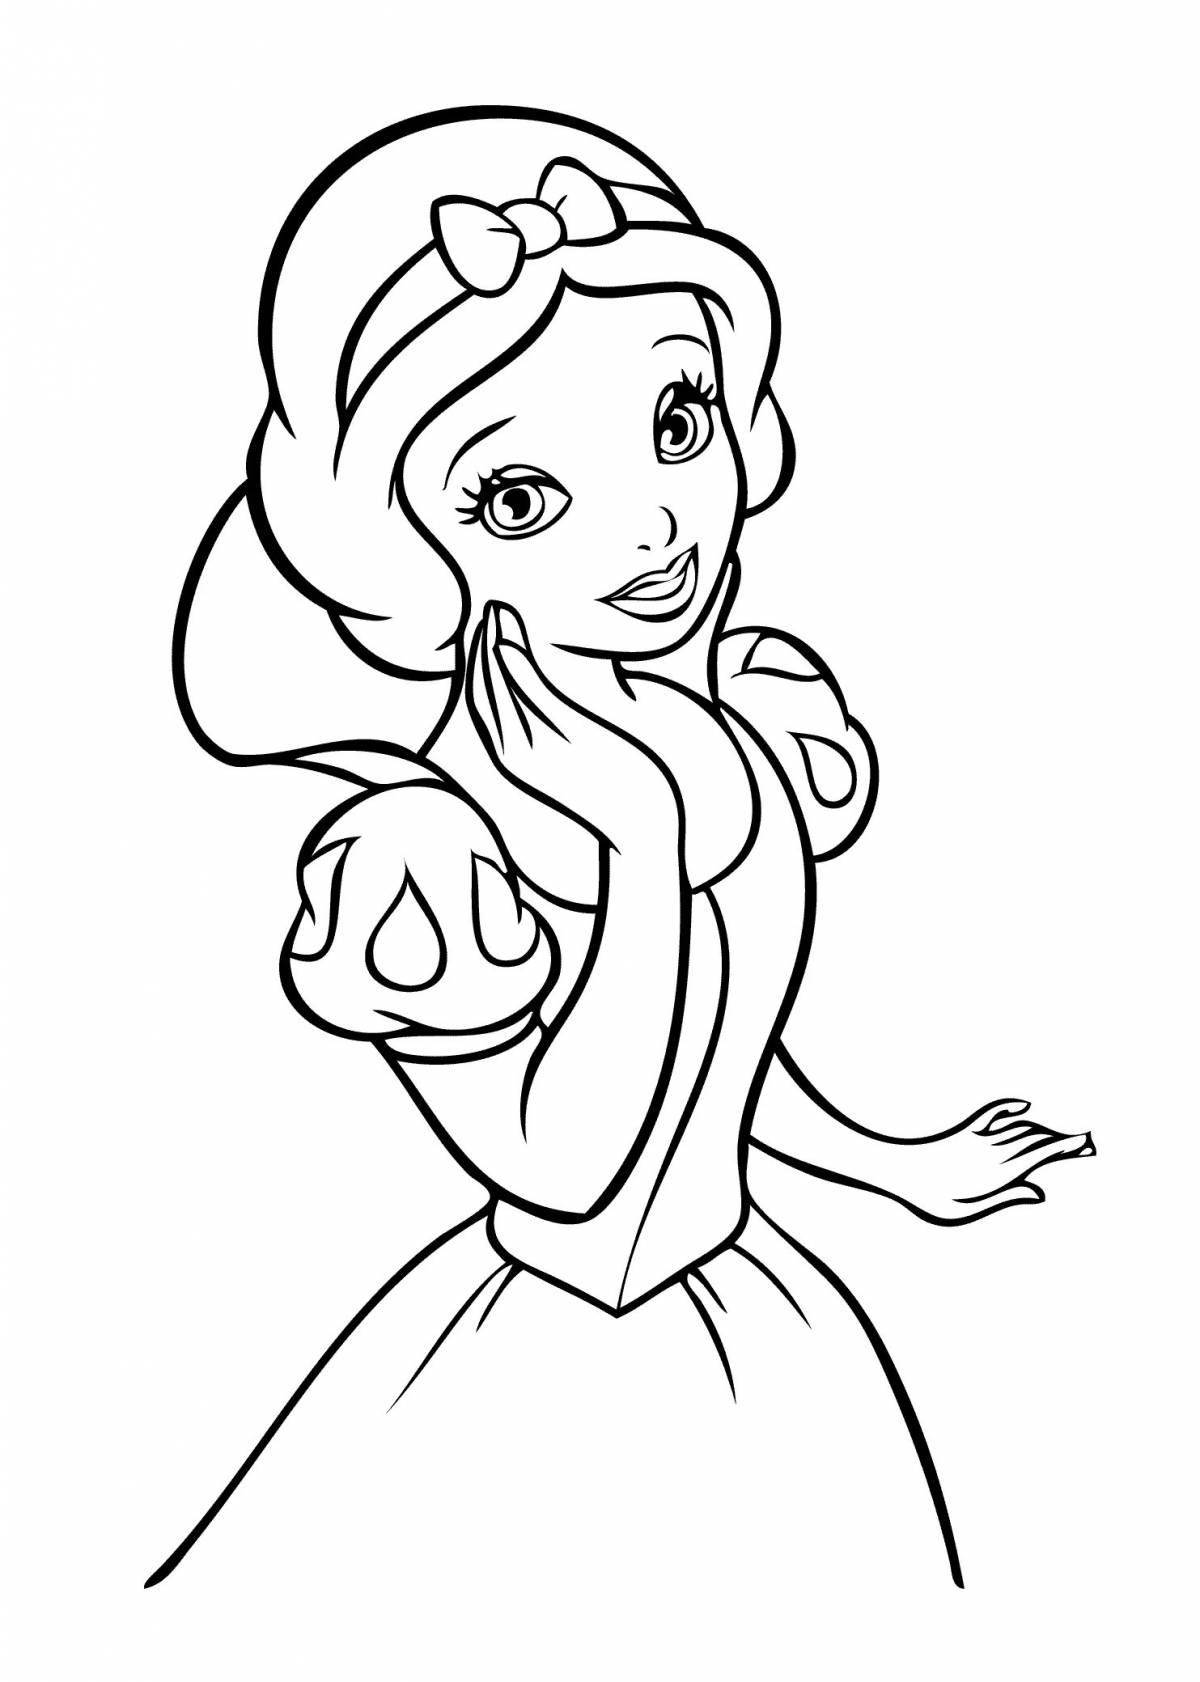 Coloring pages for children princesses